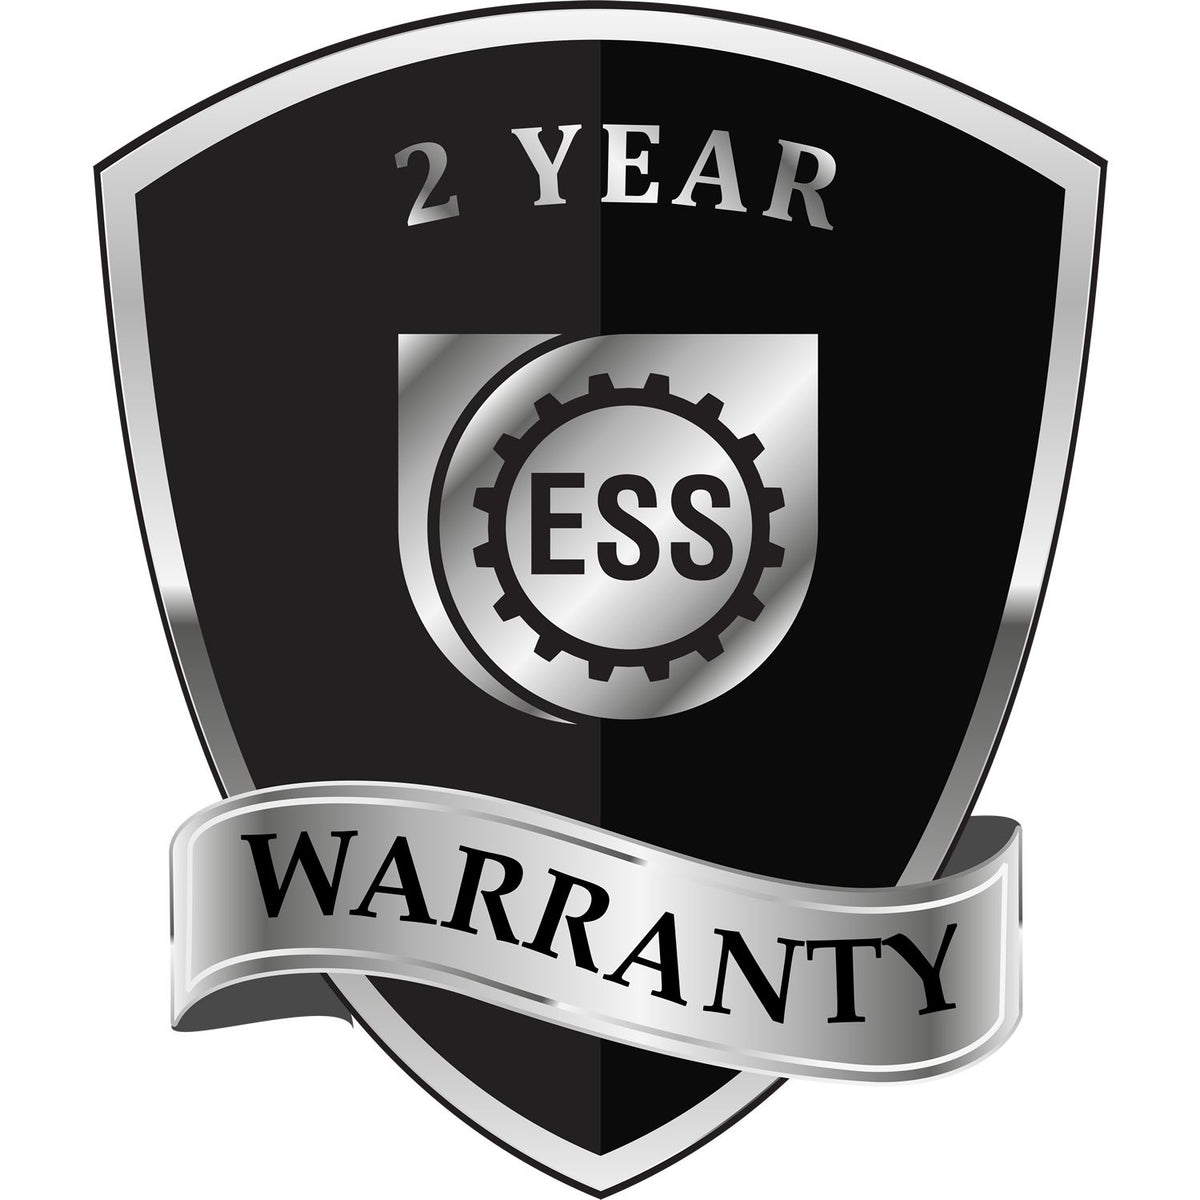 A badge or emblem showing a warranty icon for the Idaho Engineer Desk Seal